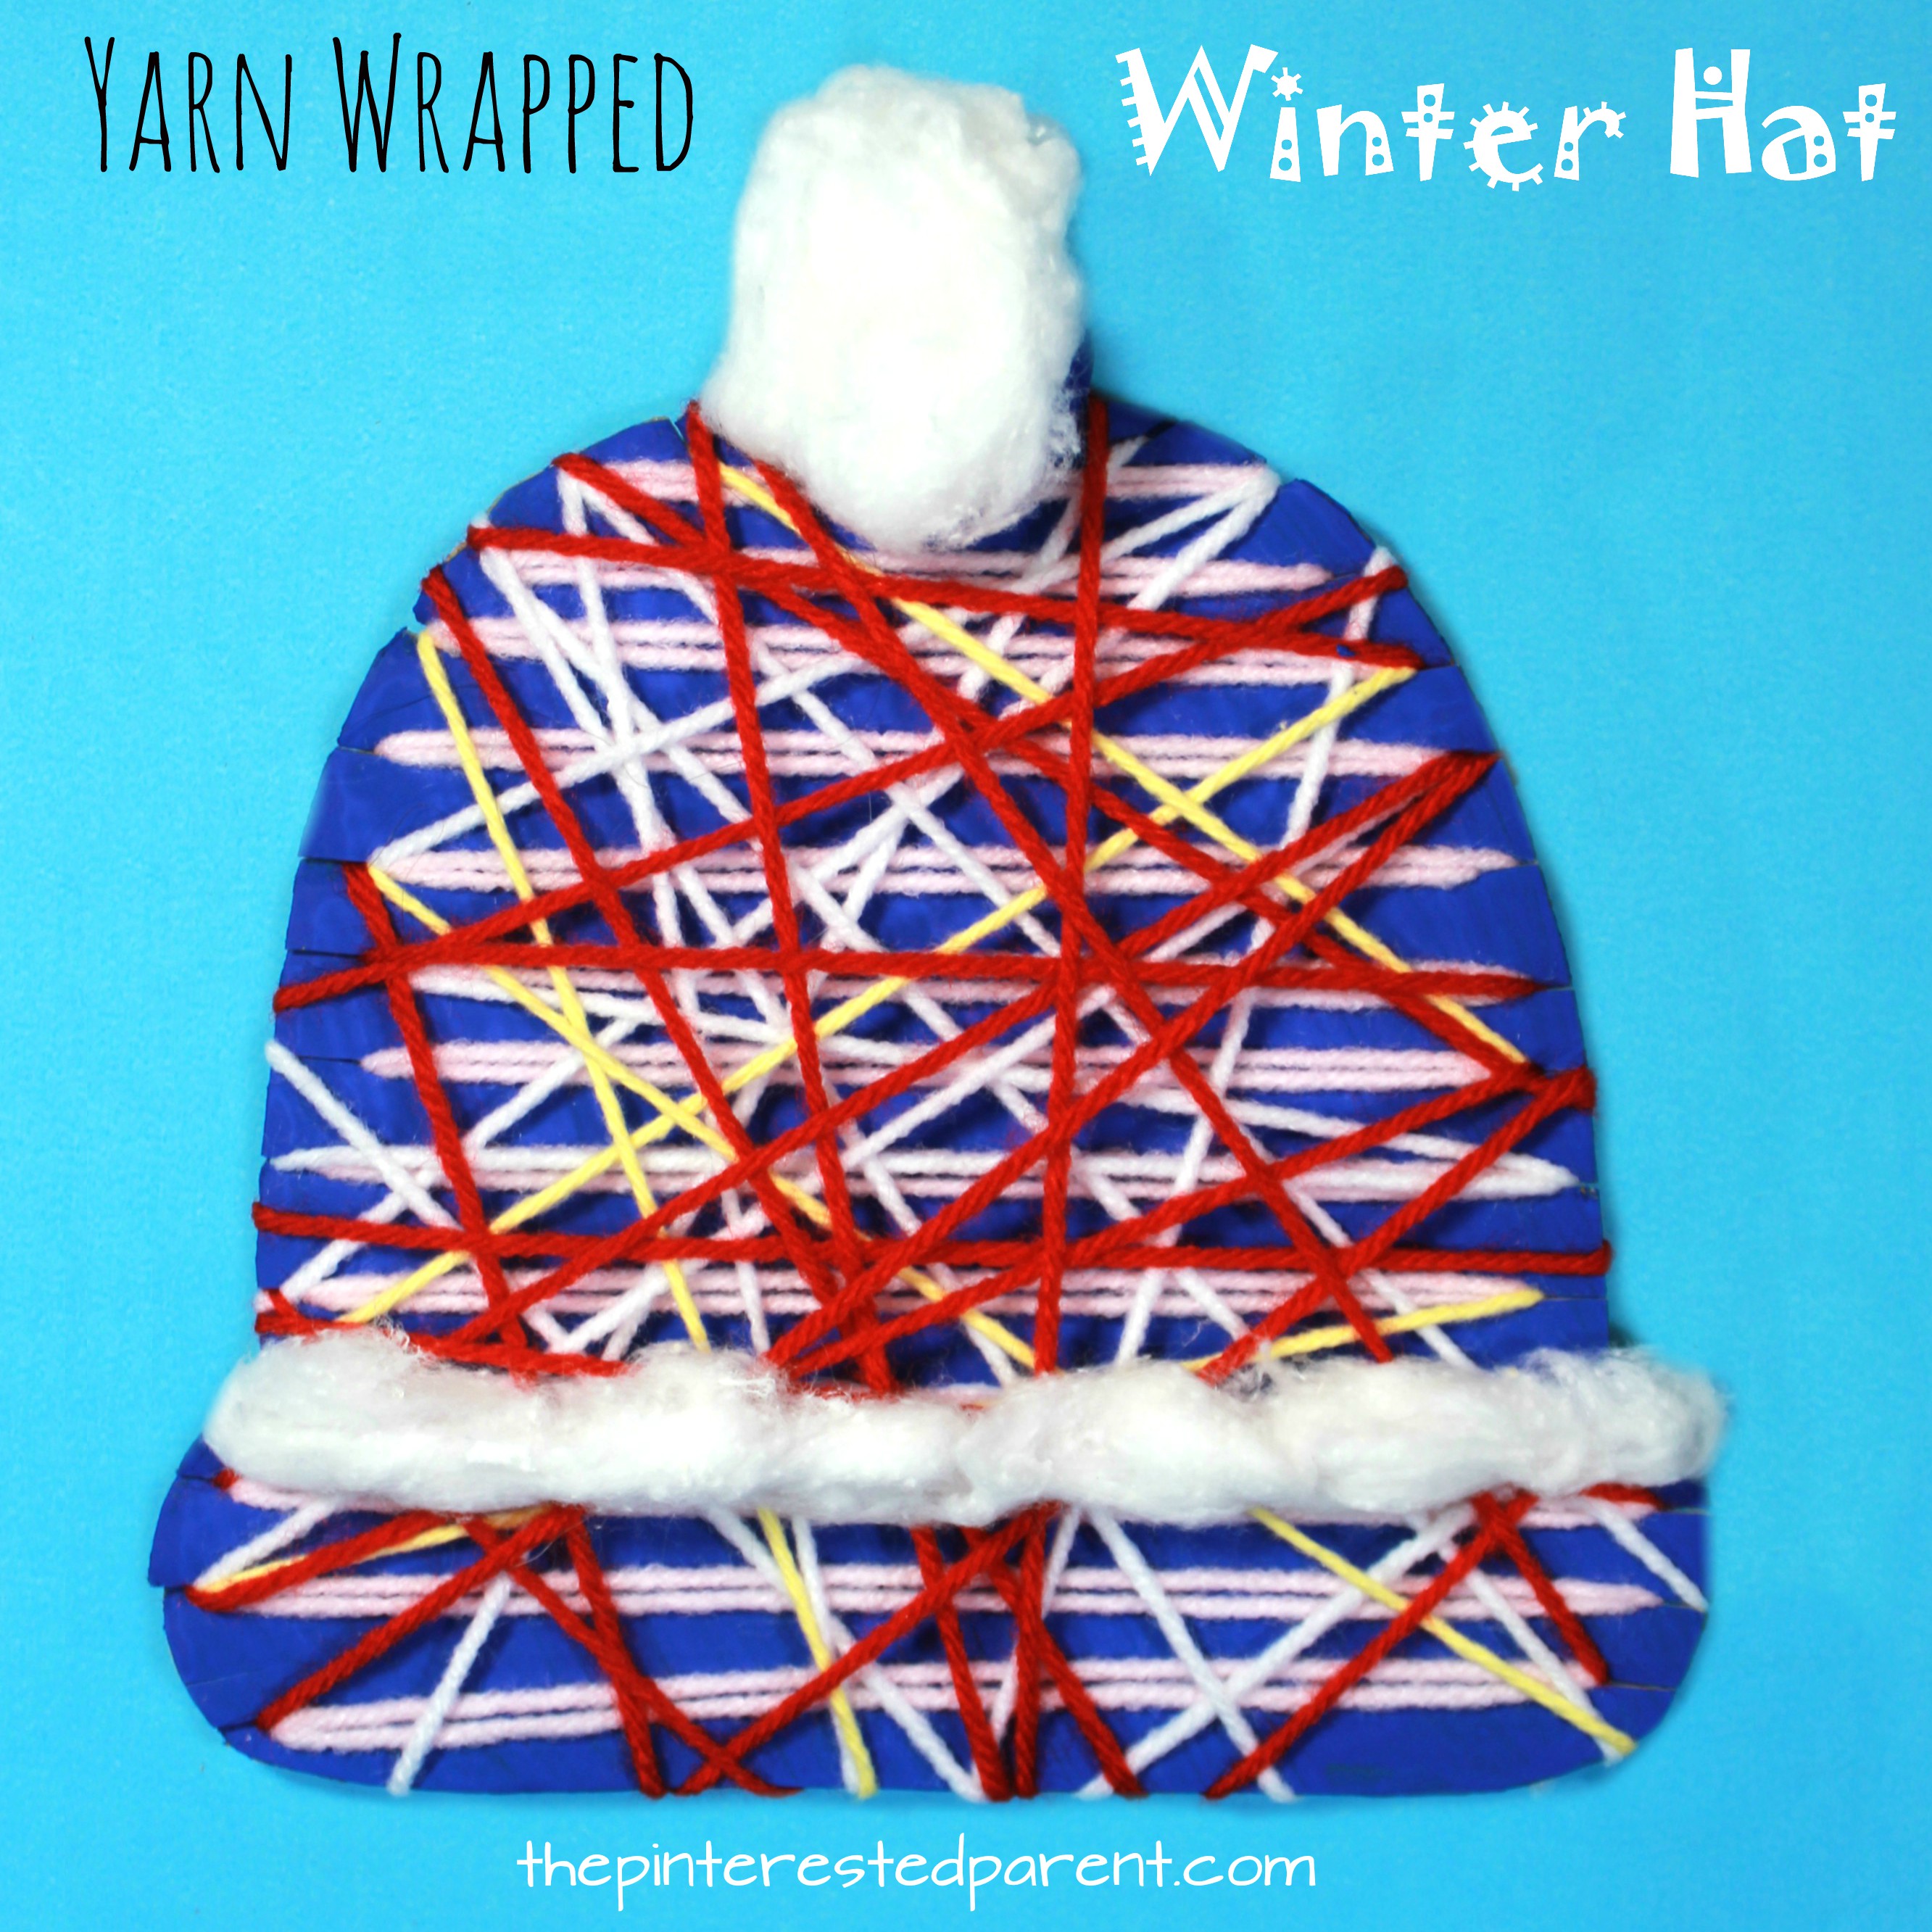 Yarn wrapped winter hats crafts, wonderful for fine motor skills - kids arts and crafts for the winter